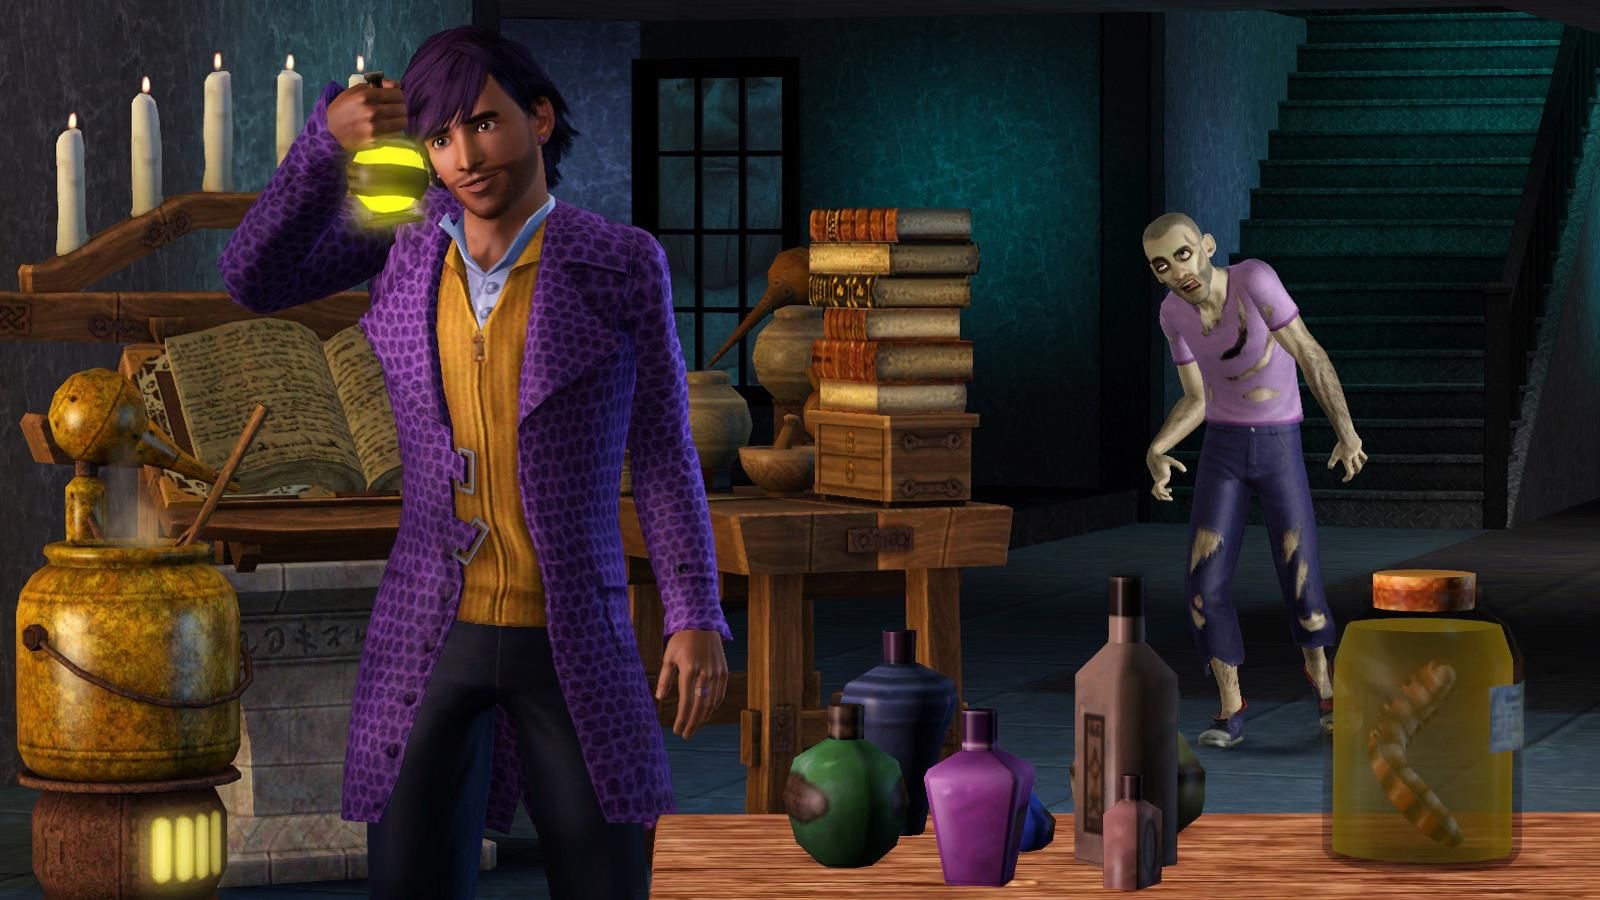 The Sims 3 Supernatural free PC -FLT iso torrent Download